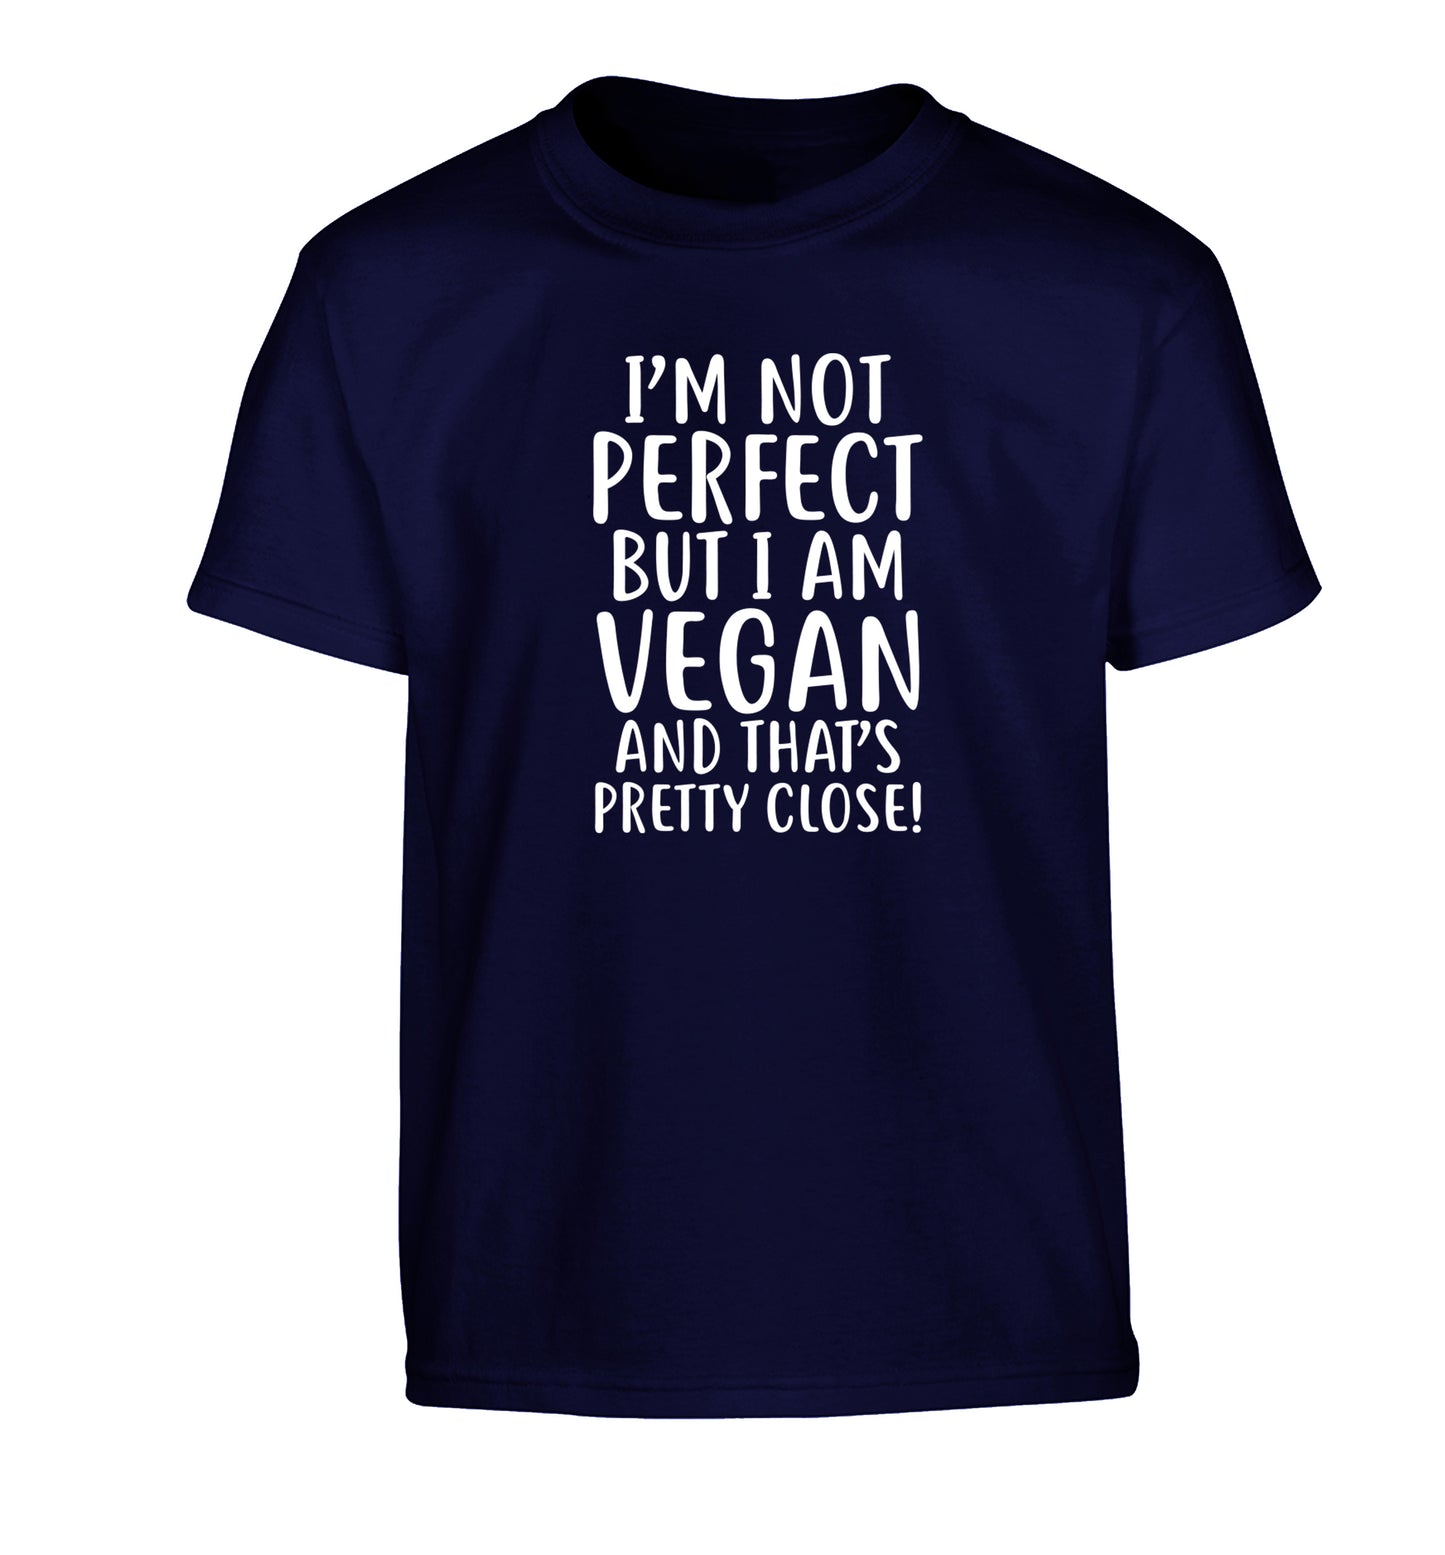 Might not be perfect but I am vegan Children's navy Tshirt 12-13 Years